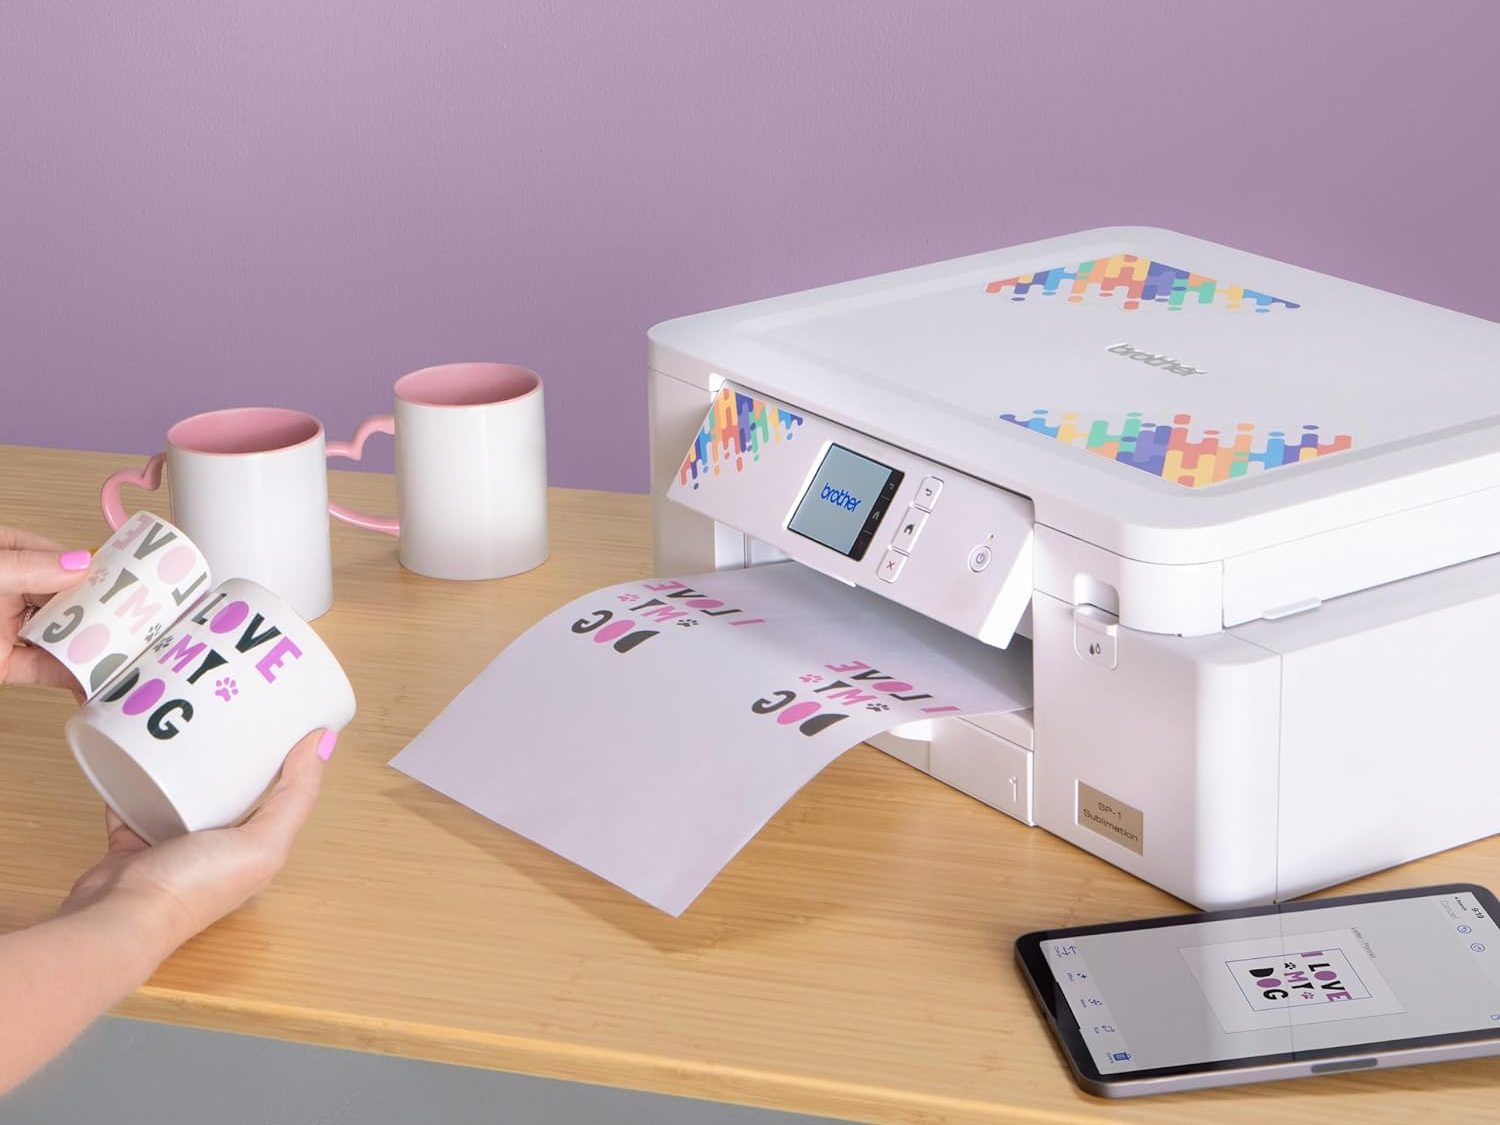 Top Sublimation Printing Systems for Beginners: Our Picks